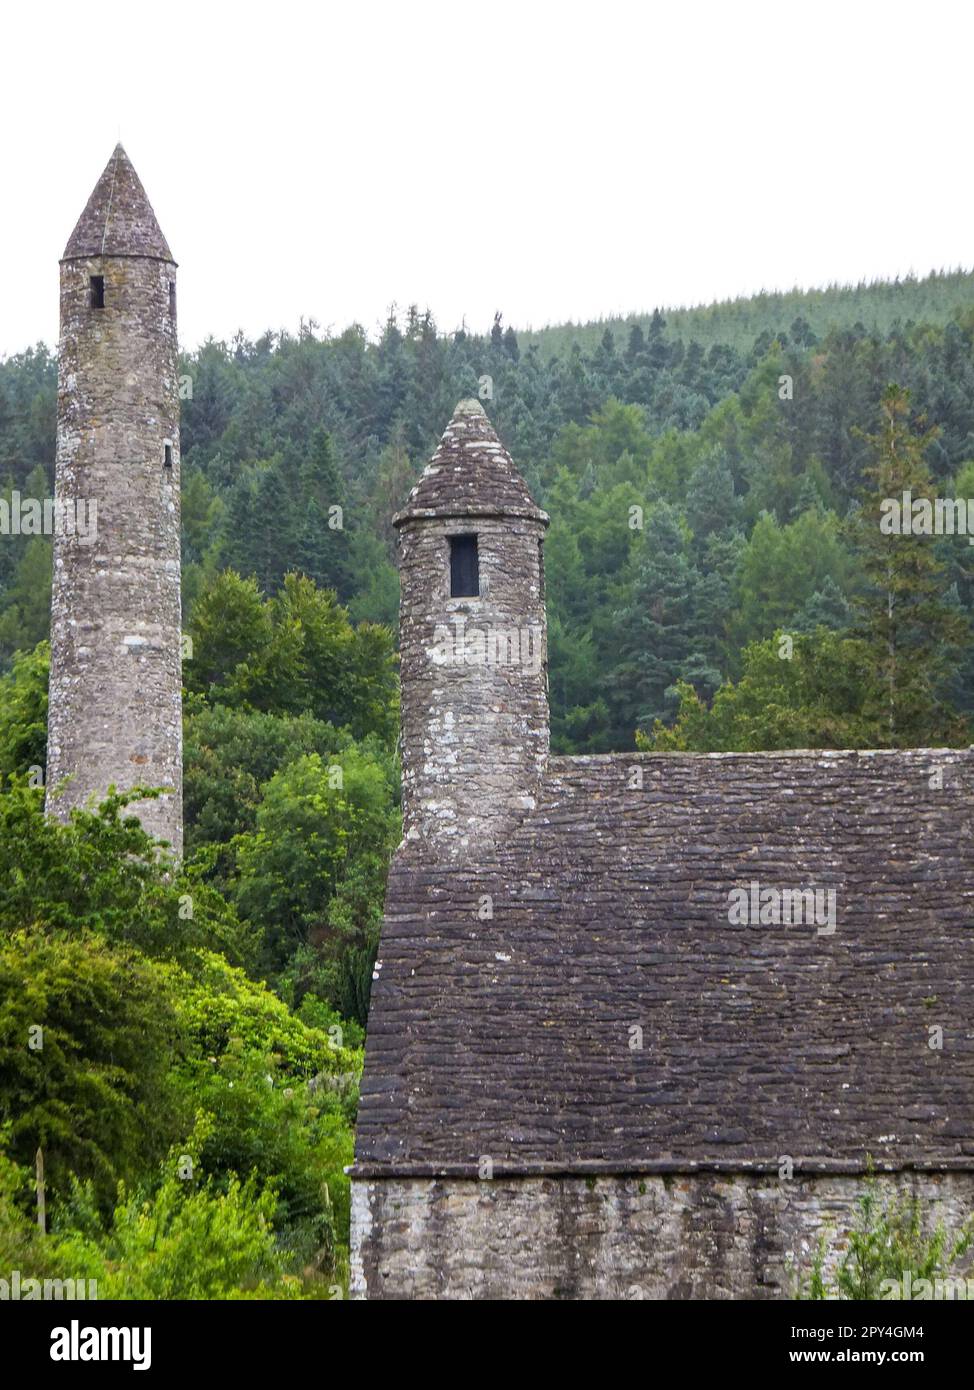 The ancient architecture of Saint Kevin's Kitchen and the Round Tower at Glendalough Monastic City in Wicklow Mountains National Park, Ireland. Stock Photo